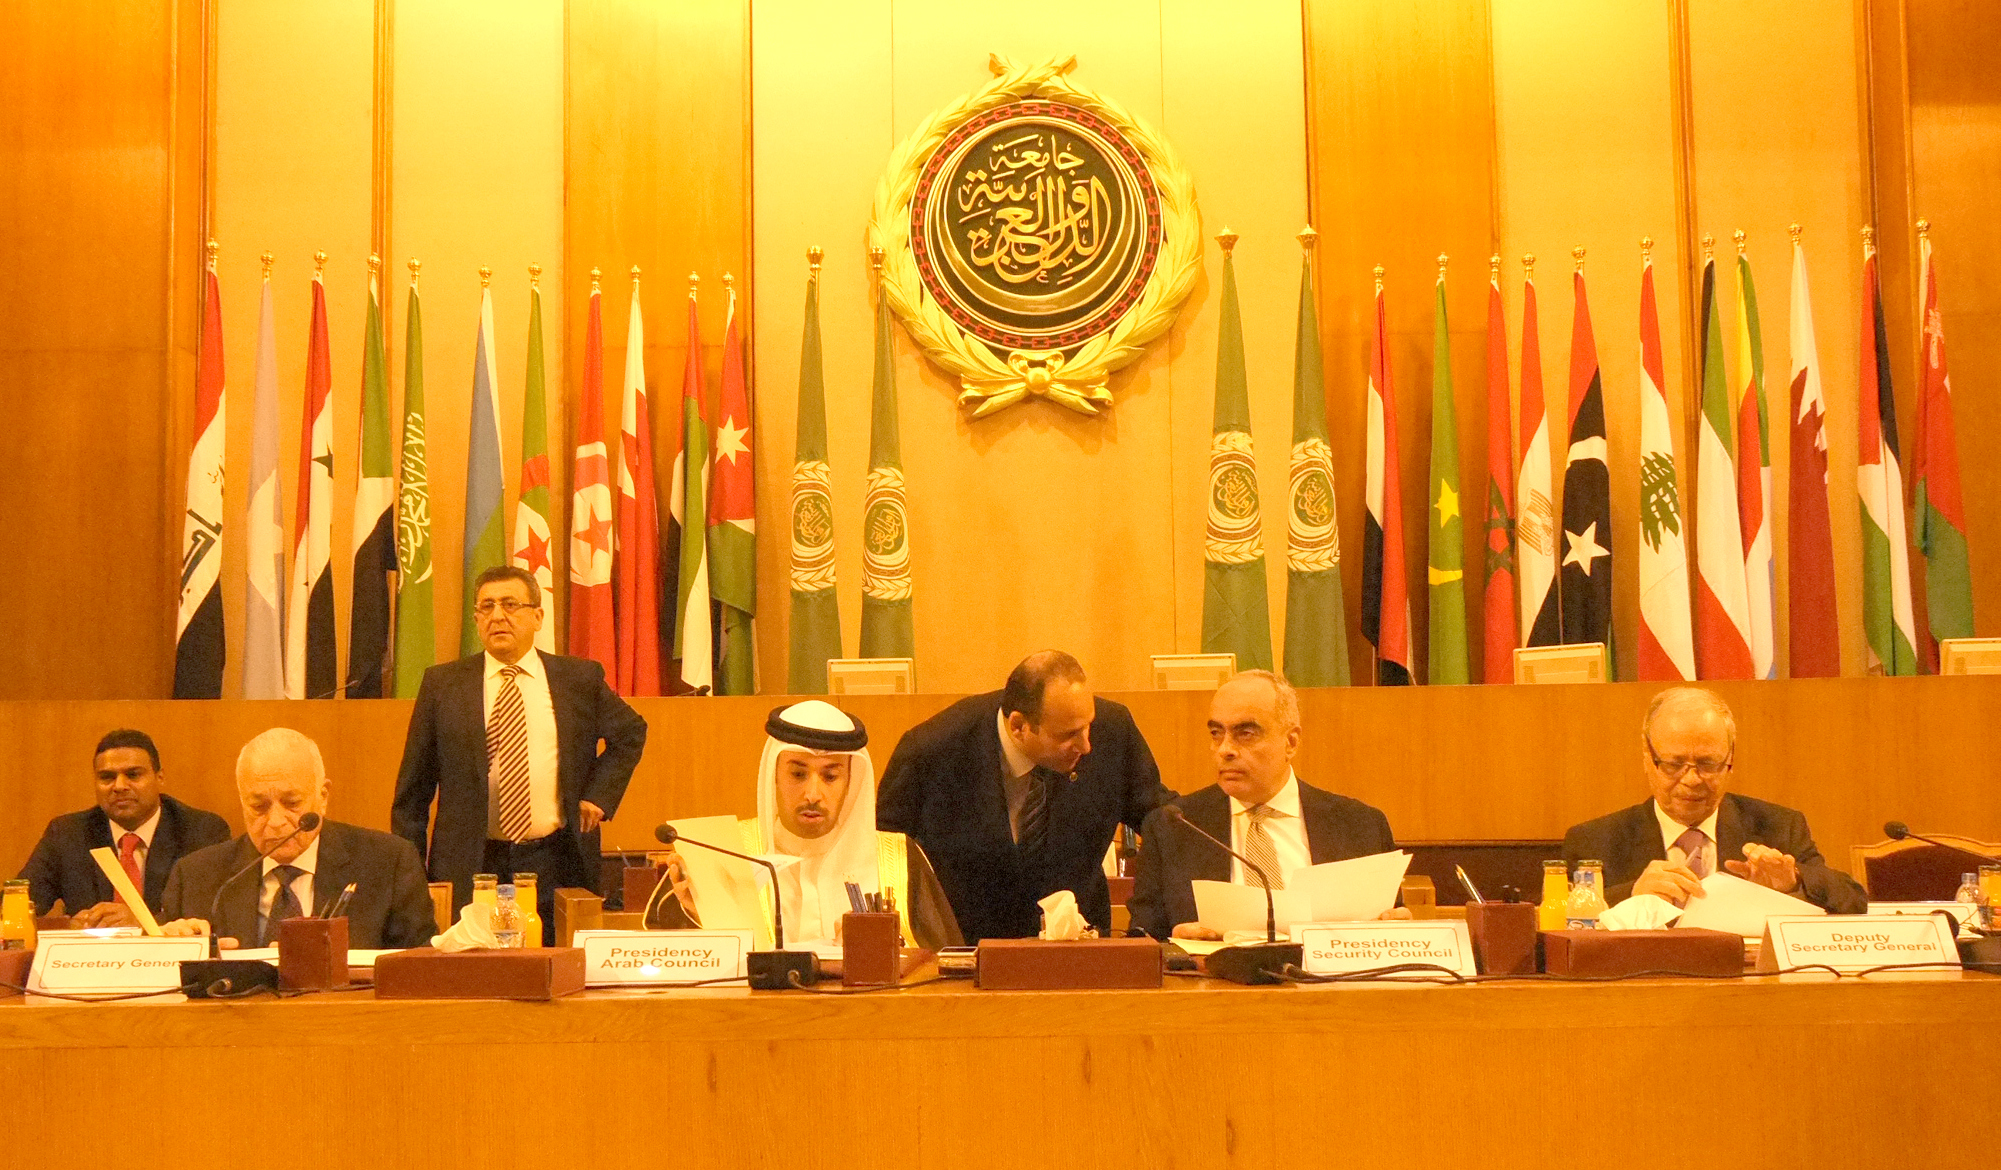 Meeting between the Arab League's permanent envoys and representatives of UNSC member nations